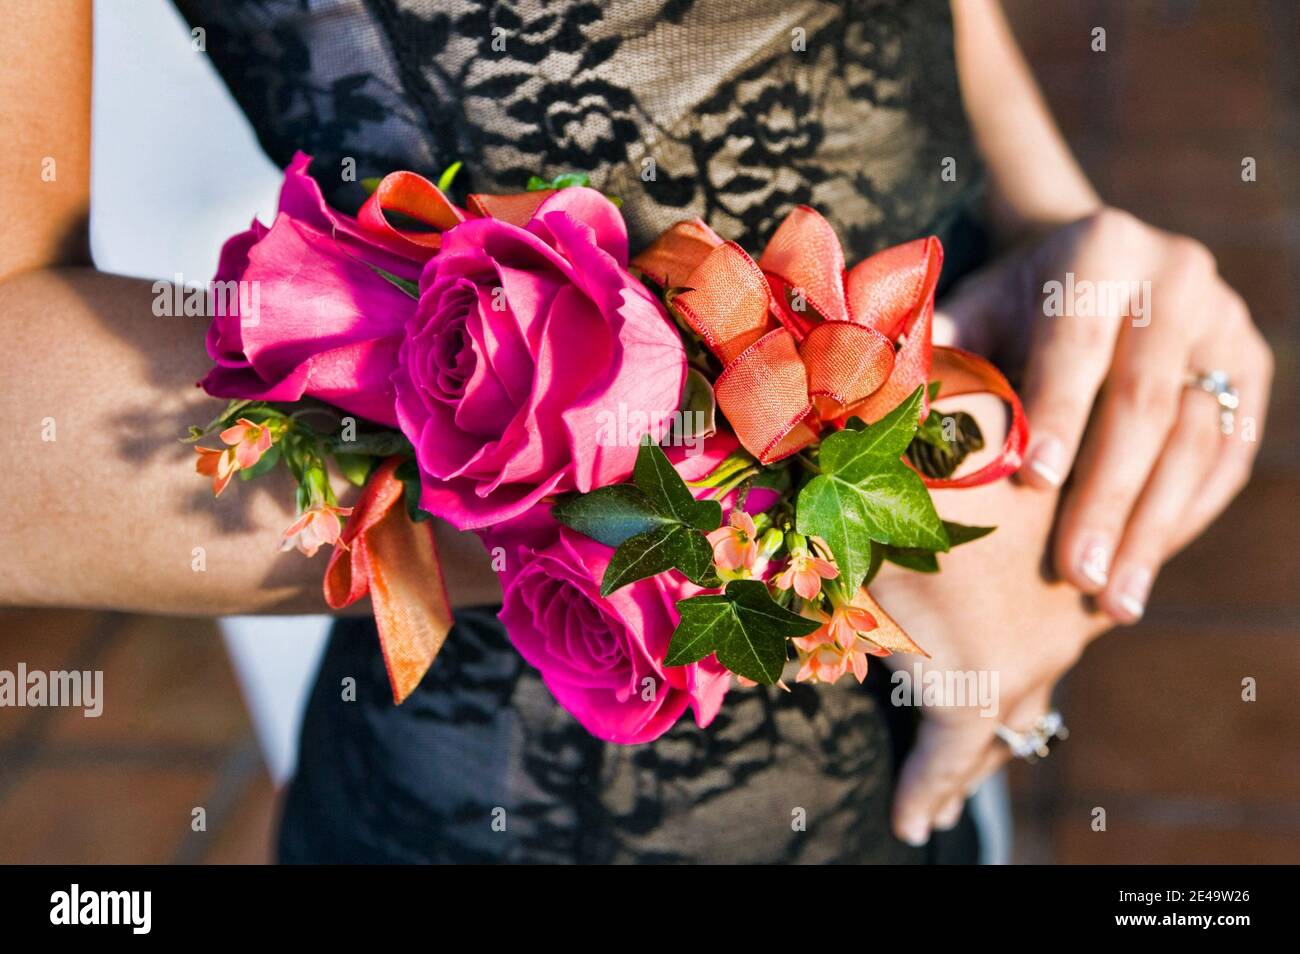 Close up photo of woman in prom with corsage Stock Photo